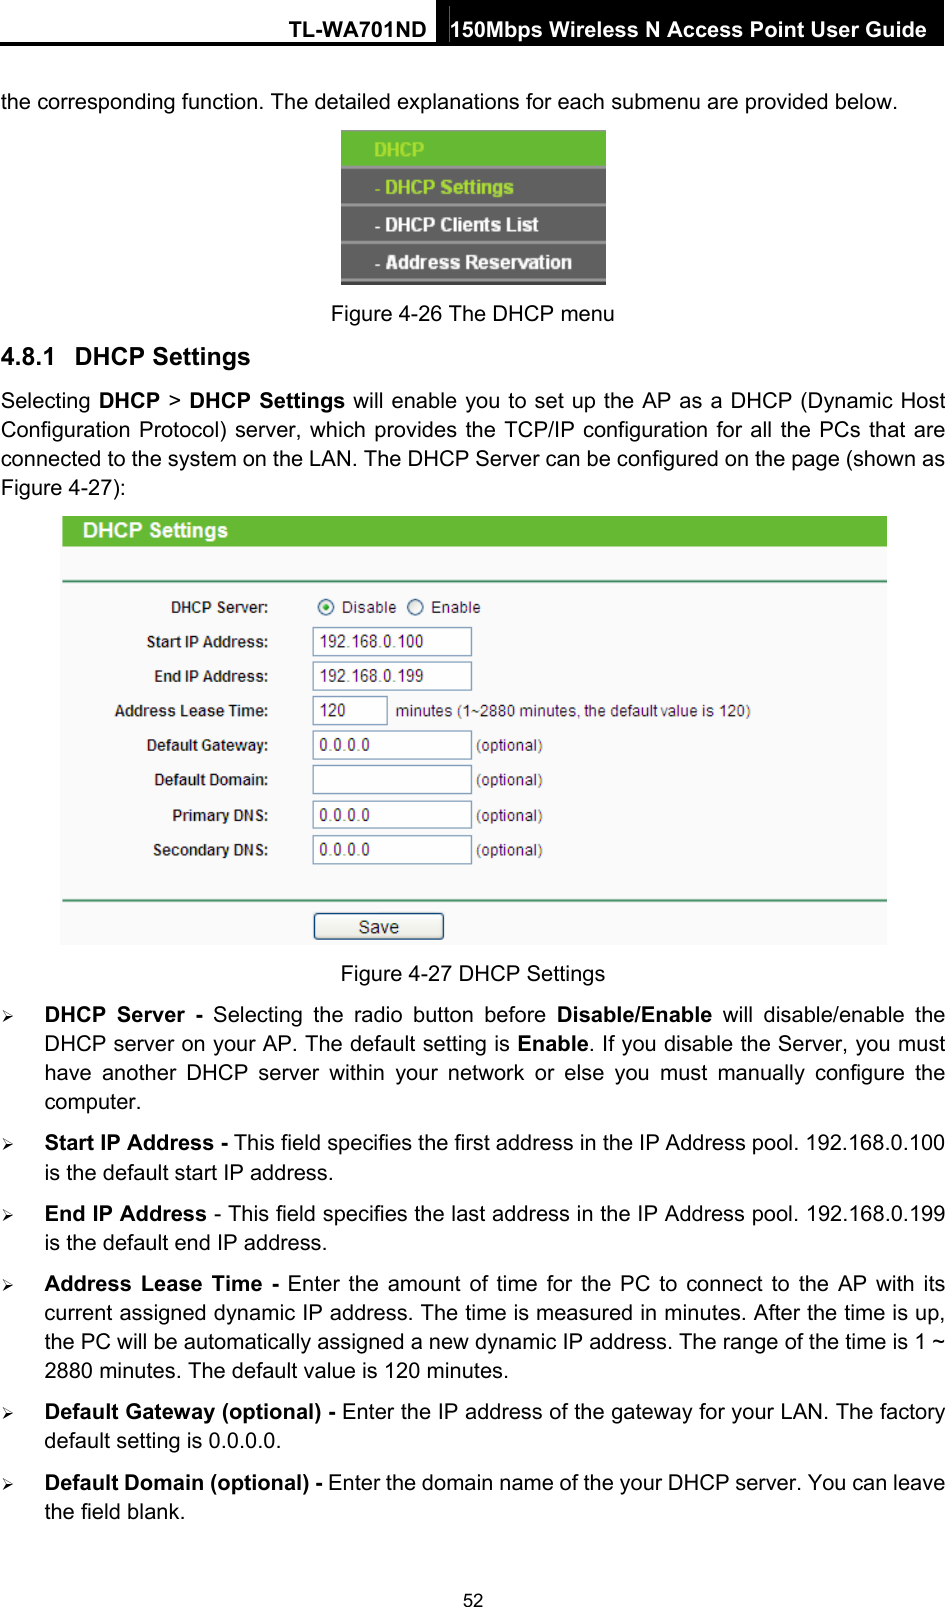 TL-WA701ND 150Mbps Wireless N Access Point User Guide the corresponding function. The detailed explanations for each submenu are provided below.  Figure 4-26 The DHCP menu 4.8.1  DHCP Settings Selecting DHCP &gt; DHCP Settings will enable you to set up the AP as a DHCP (Dynamic Host Configuration Protocol) server, which provides the TCP/IP configuration for all the PCs that are connected to the system on the LAN. The DHCP Server can be configured on the page (shown as Figure 4-27):  Figure 4-27 DHCP Settings ¾ DHCP Server - Selecting the radio button before Disable/Enable will disable/enable the DHCP server on your AP. The default setting is Enable. If you disable the Server, you must have another DHCP server within your network or else you must manually configure the computer. ¾ Start IP Address - This field specifies the first address in the IP Address pool. 192.168.0.100 is the default start IP address.   ¾ End IP Address - This field specifies the last address in the IP Address pool. 192.168.0.199 is the default end IP address.   ¾ Address Lease Time - Enter the amount of time for the PC to connect to the AP with its current assigned dynamic IP address. The time is measured in minutes. After the time is up, the PC will be automatically assigned a new dynamic IP address. The range of the time is 1 ~ 2880 minutes. The default value is 120 minutes. ¾ Default Gateway (optional) - Enter the IP address of the gateway for your LAN. The factory default setting is 0.0.0.0. ¾ Default Domain (optional) - Enter the domain name of the your DHCP server. You can leave the field blank. 52 